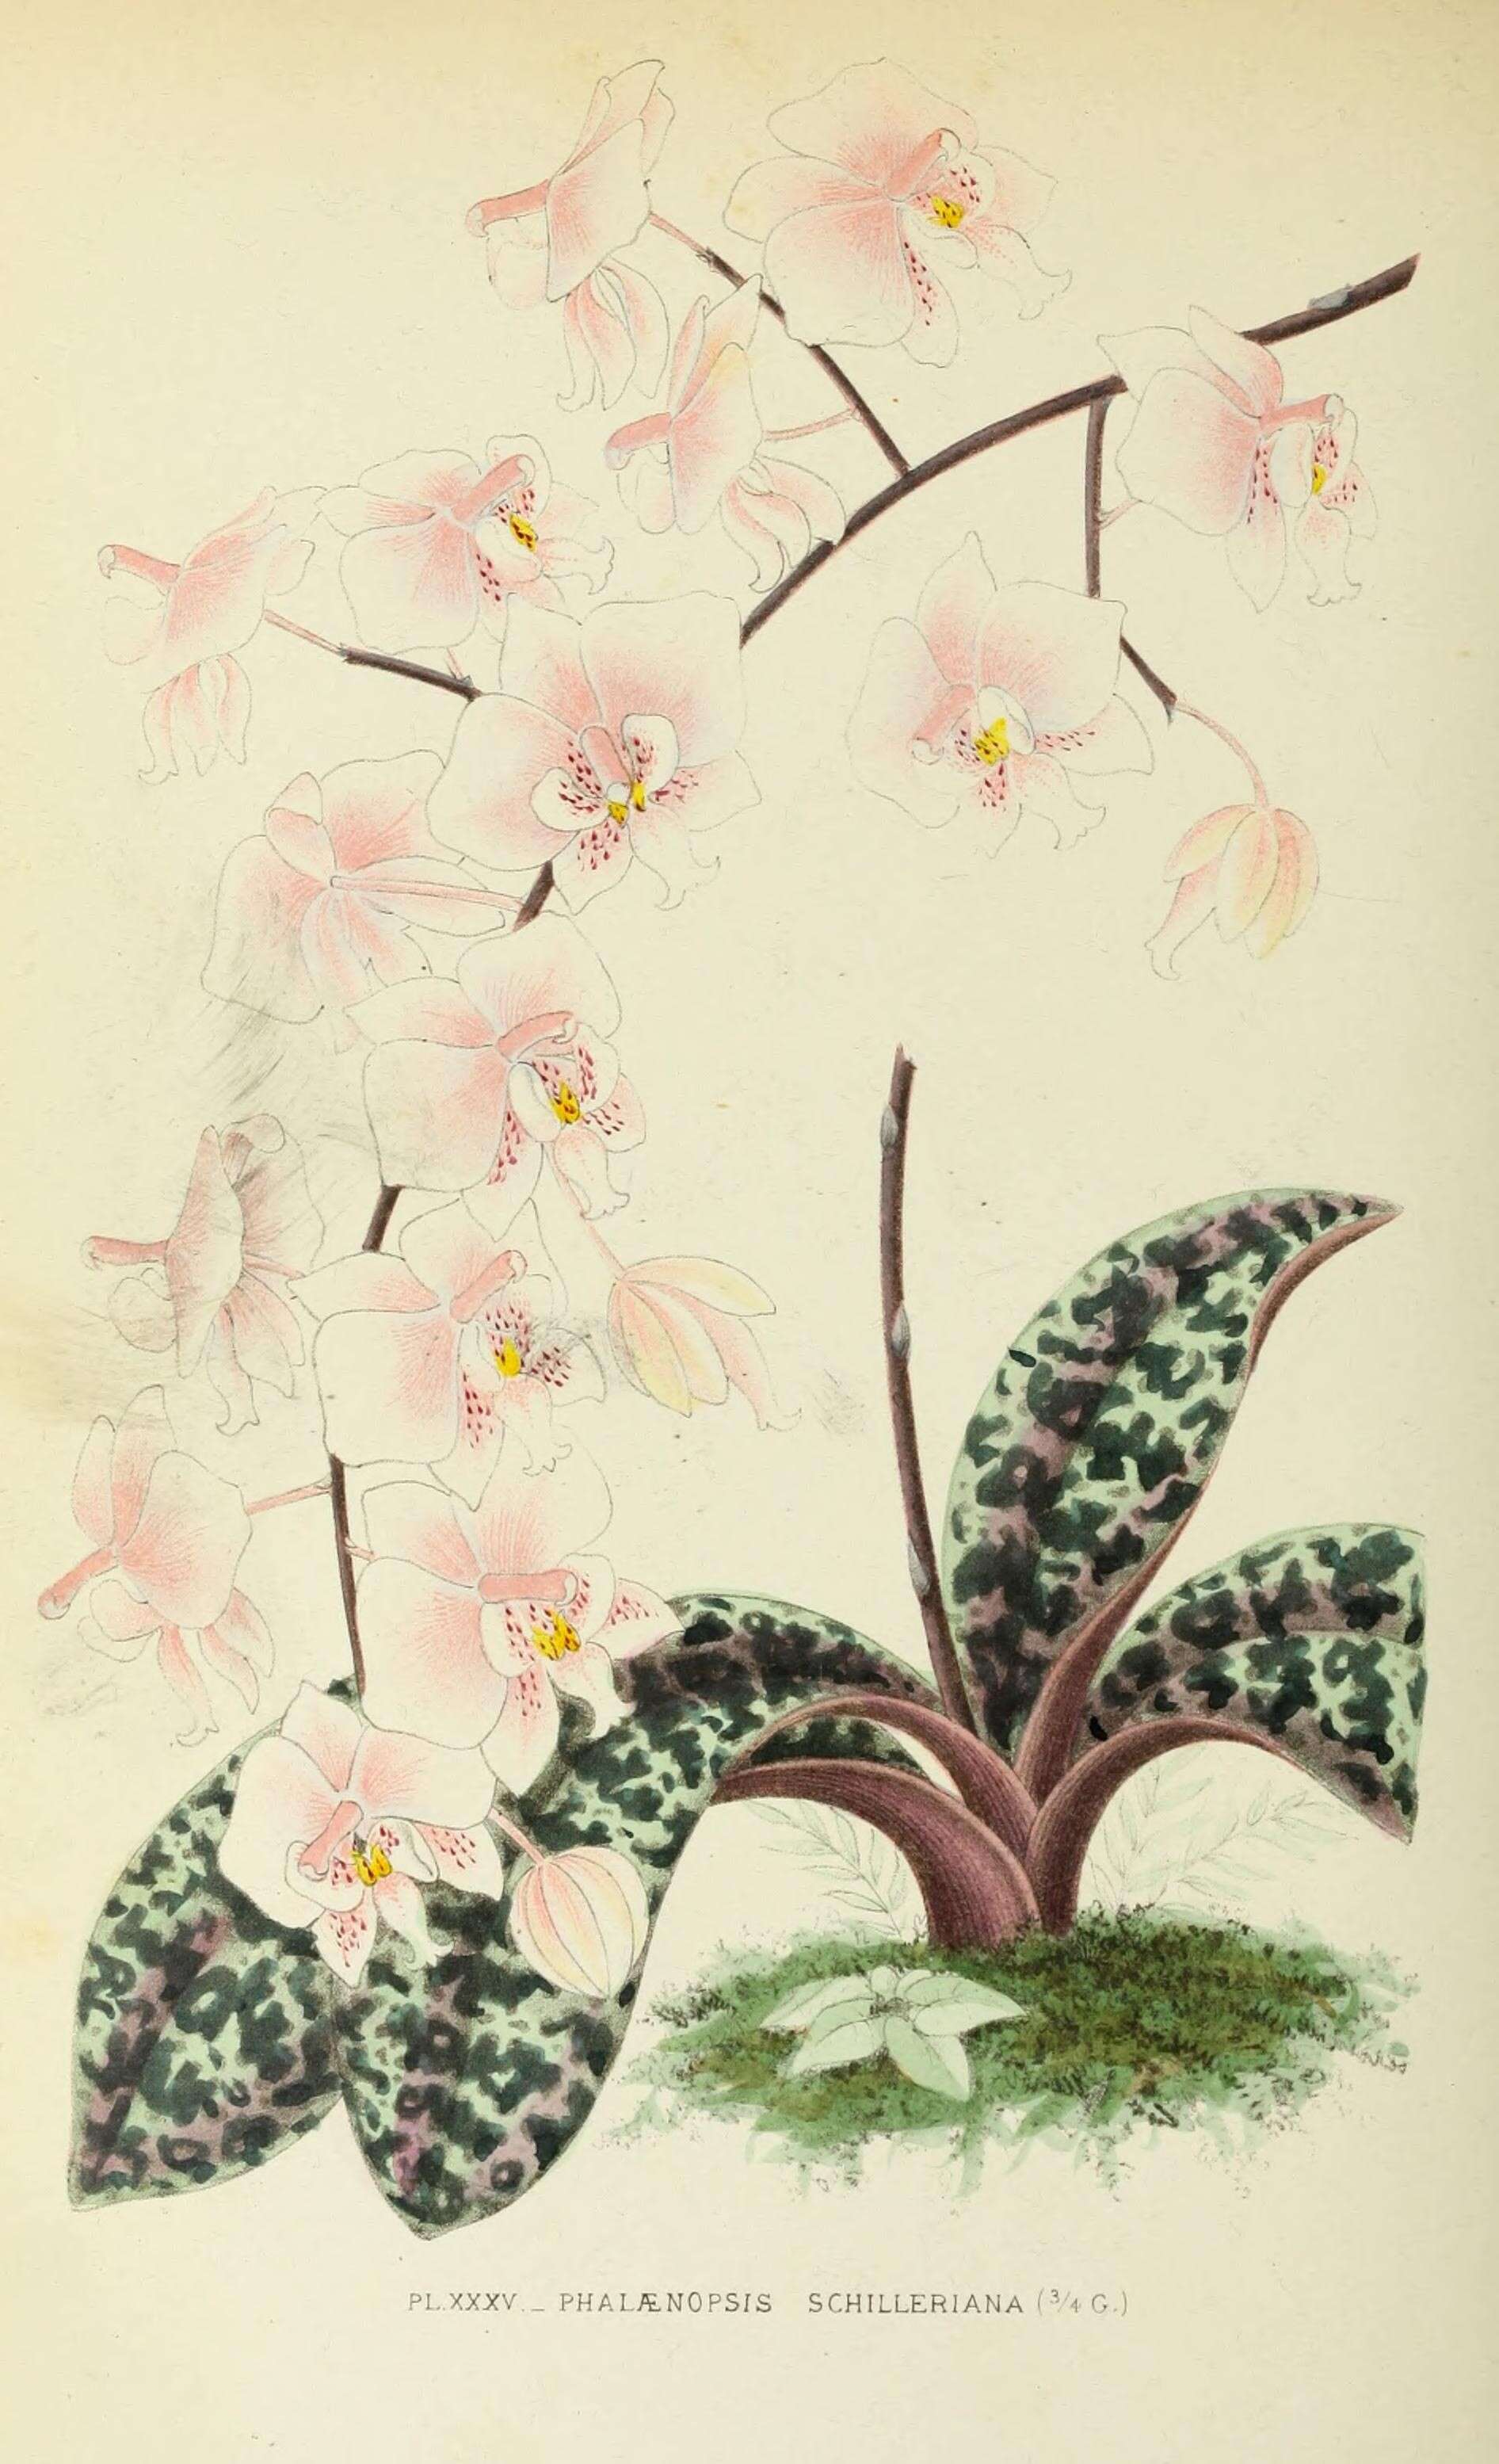 Image of Moth Orchid